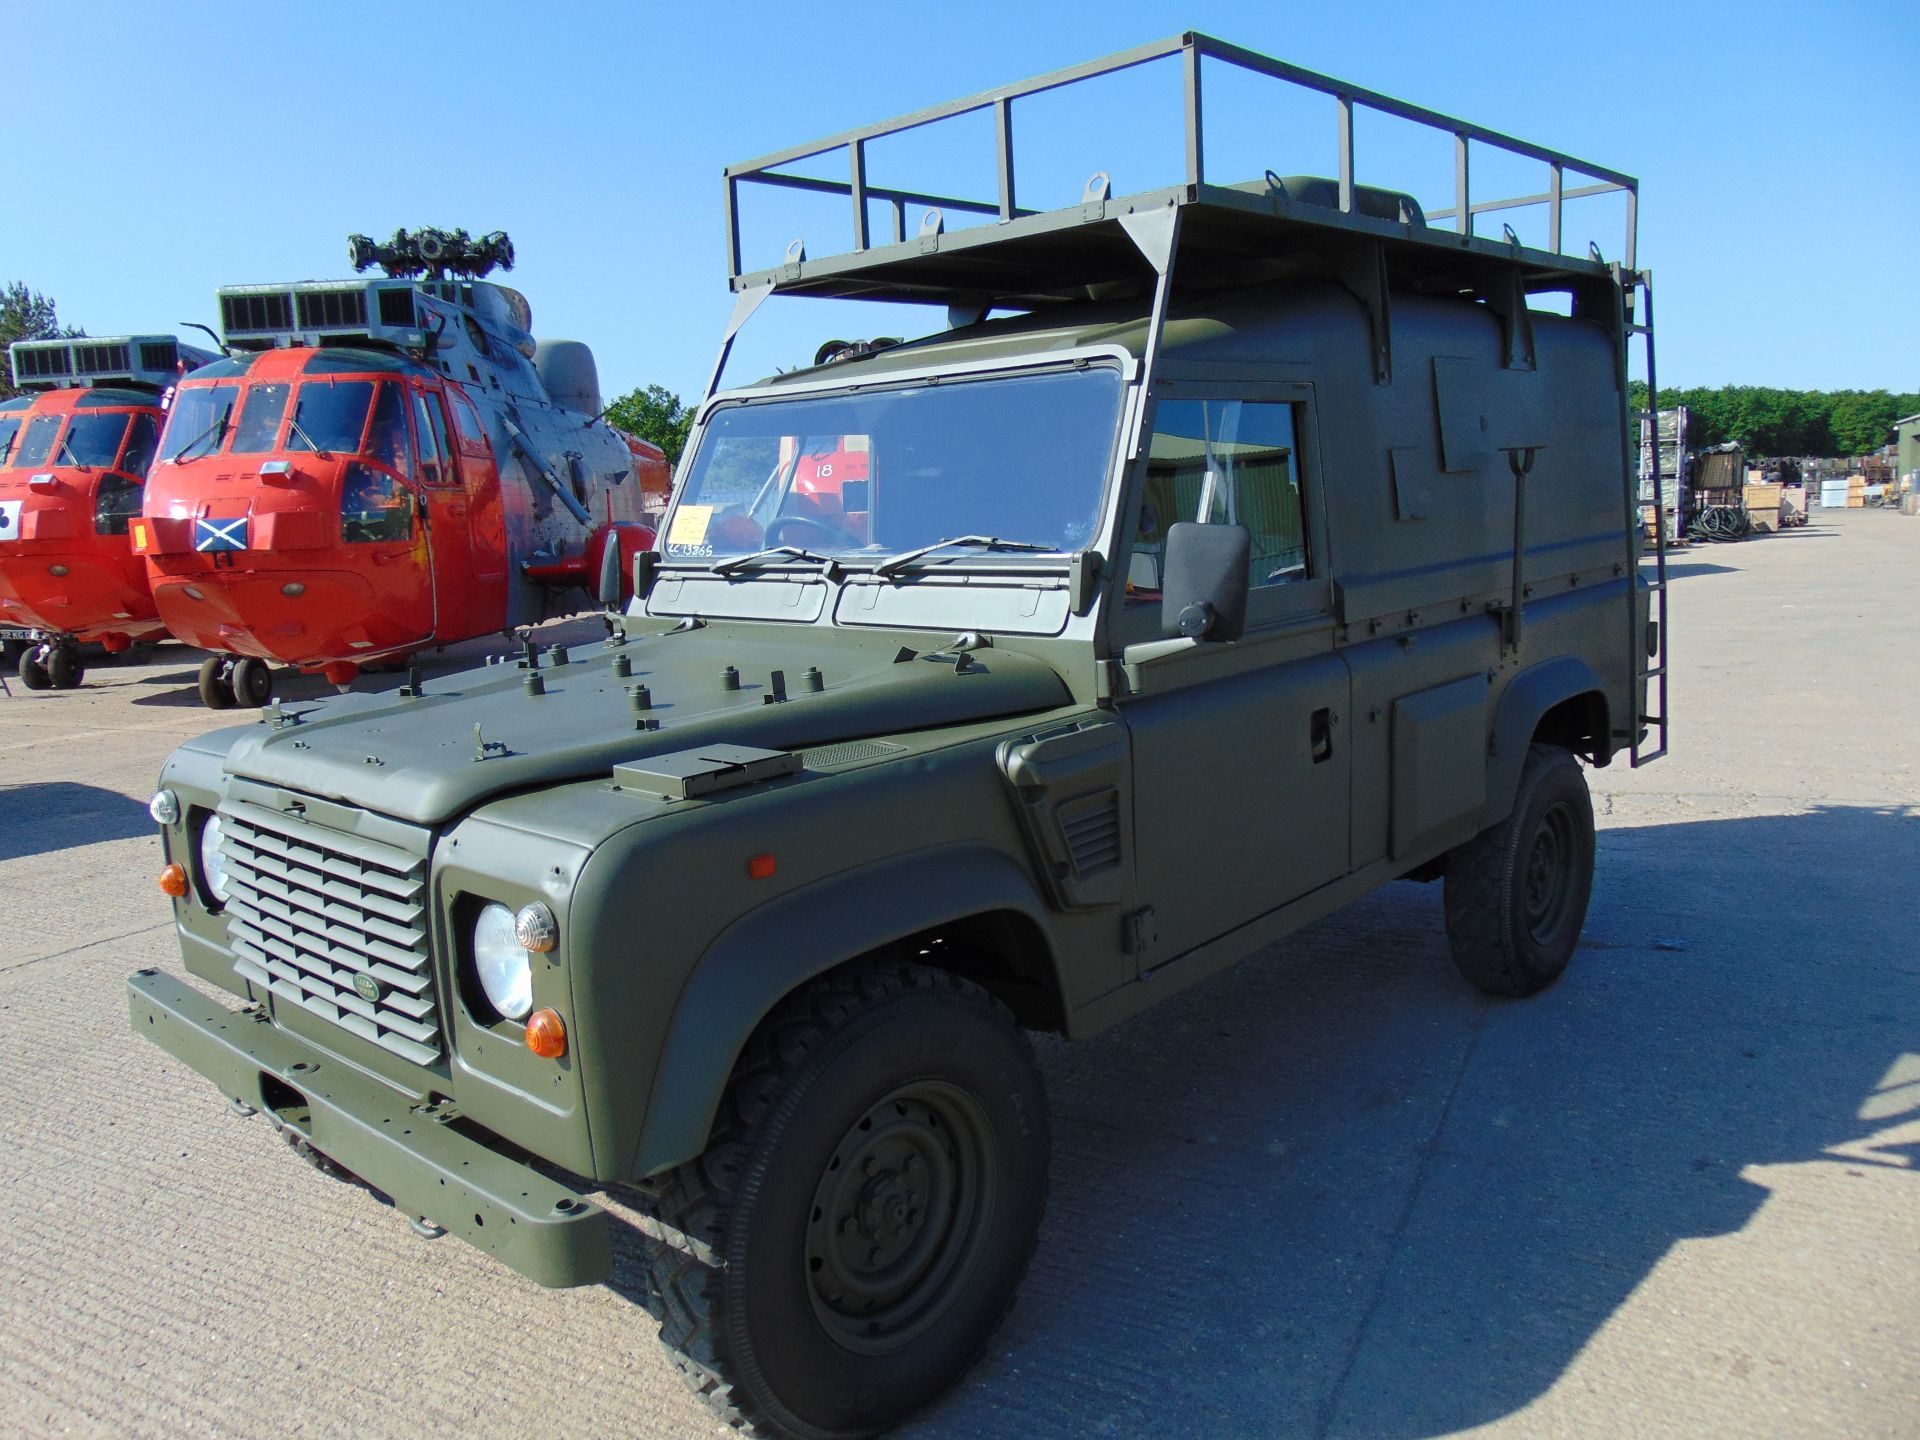 Land Rover Wolf 110 Hard Top Spice Comms vehicle - Image 3 of 25